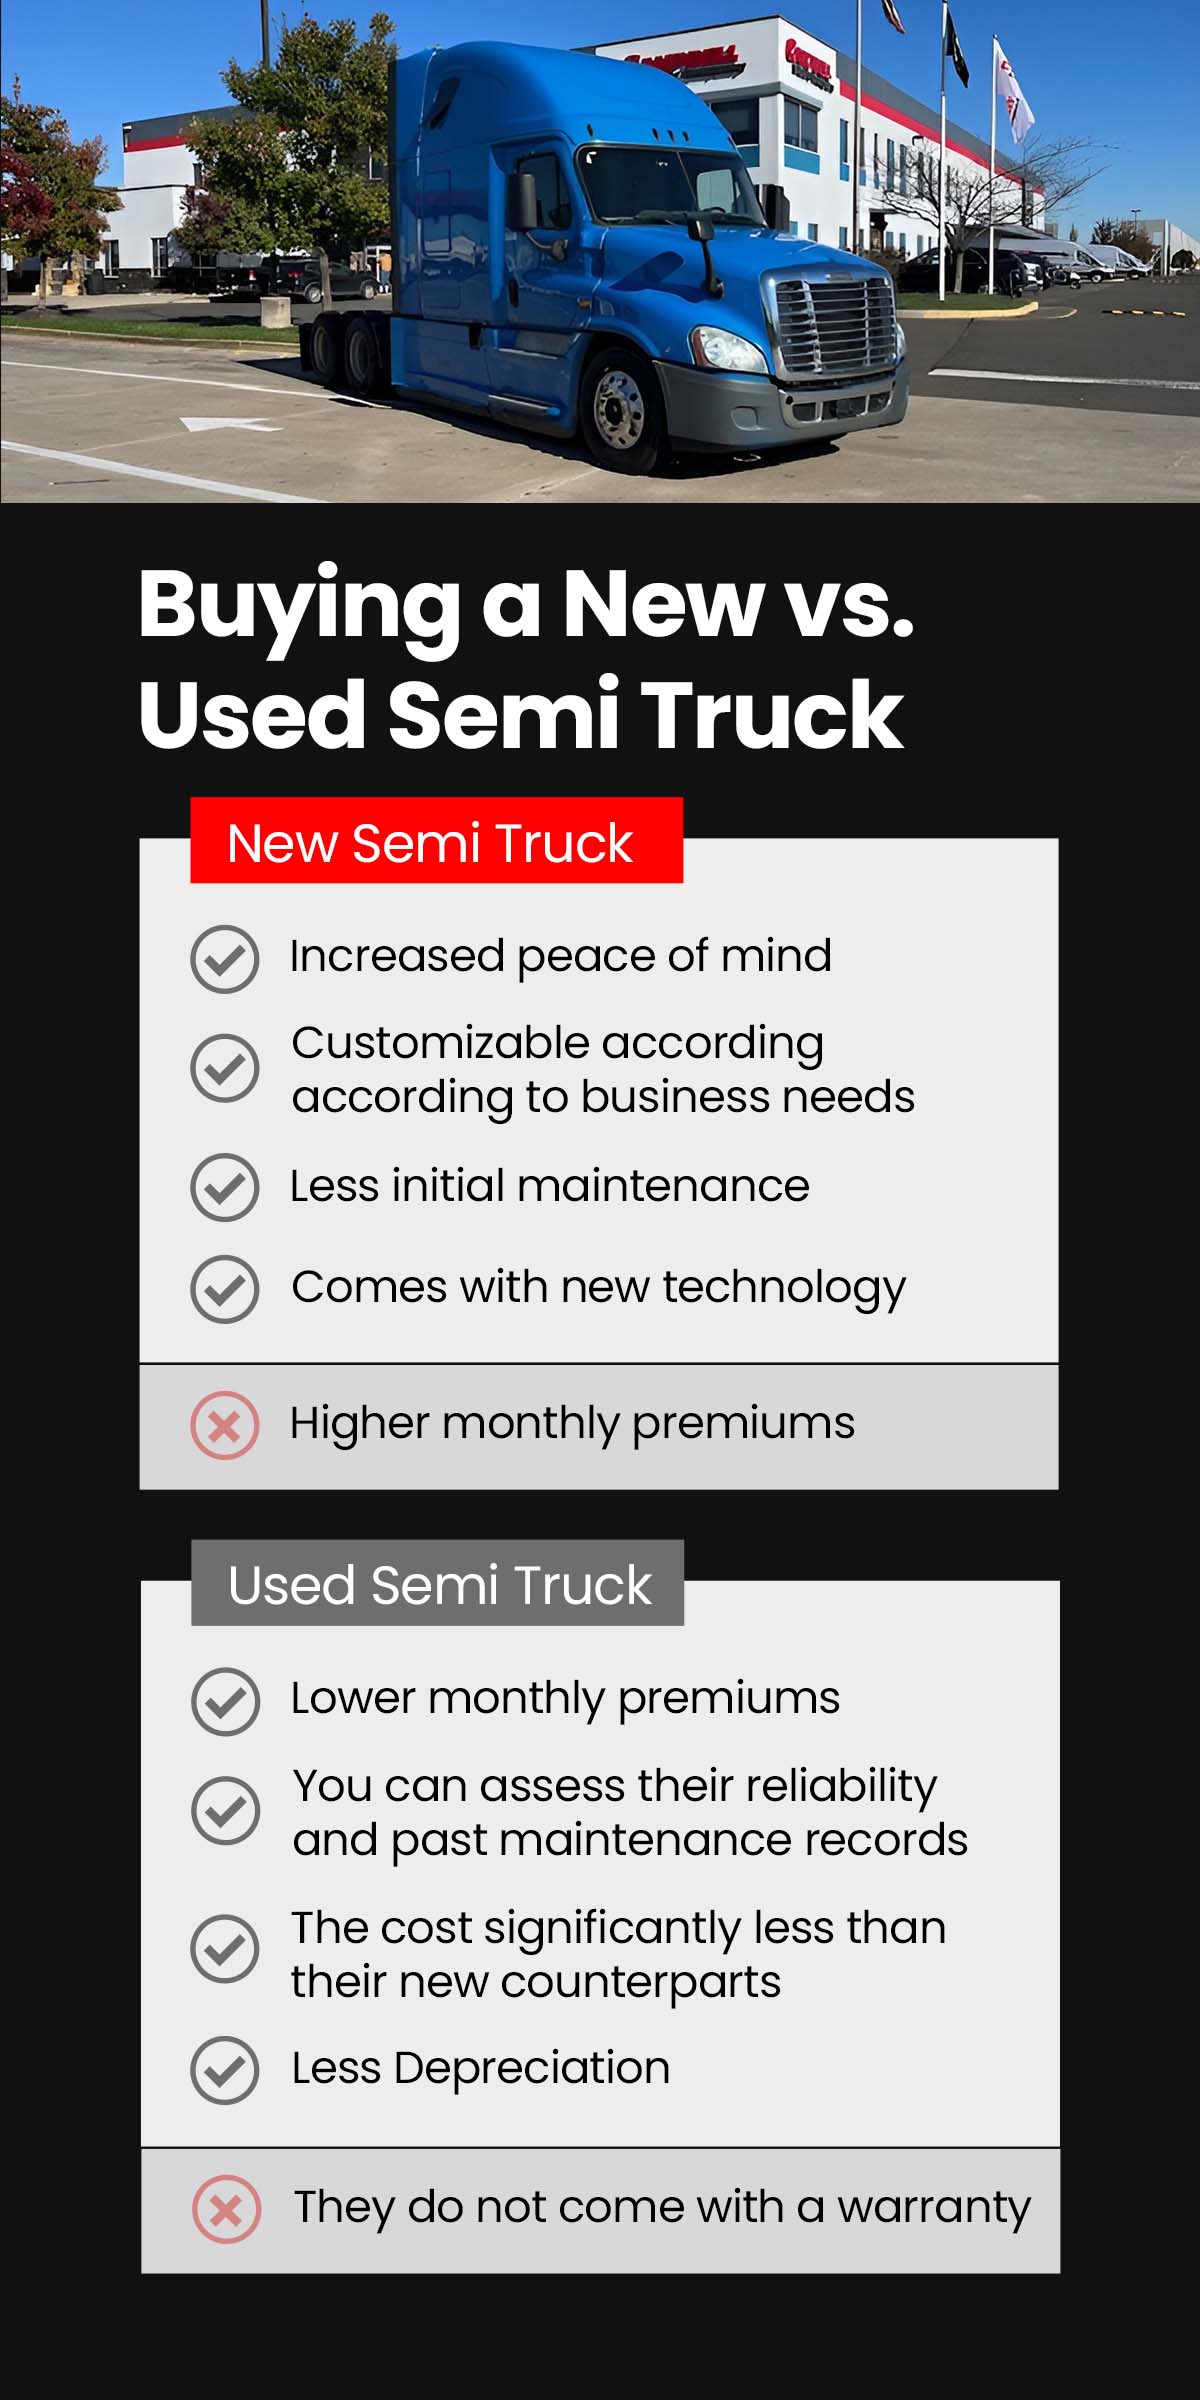 Buying a New vs. Used Semi Truck